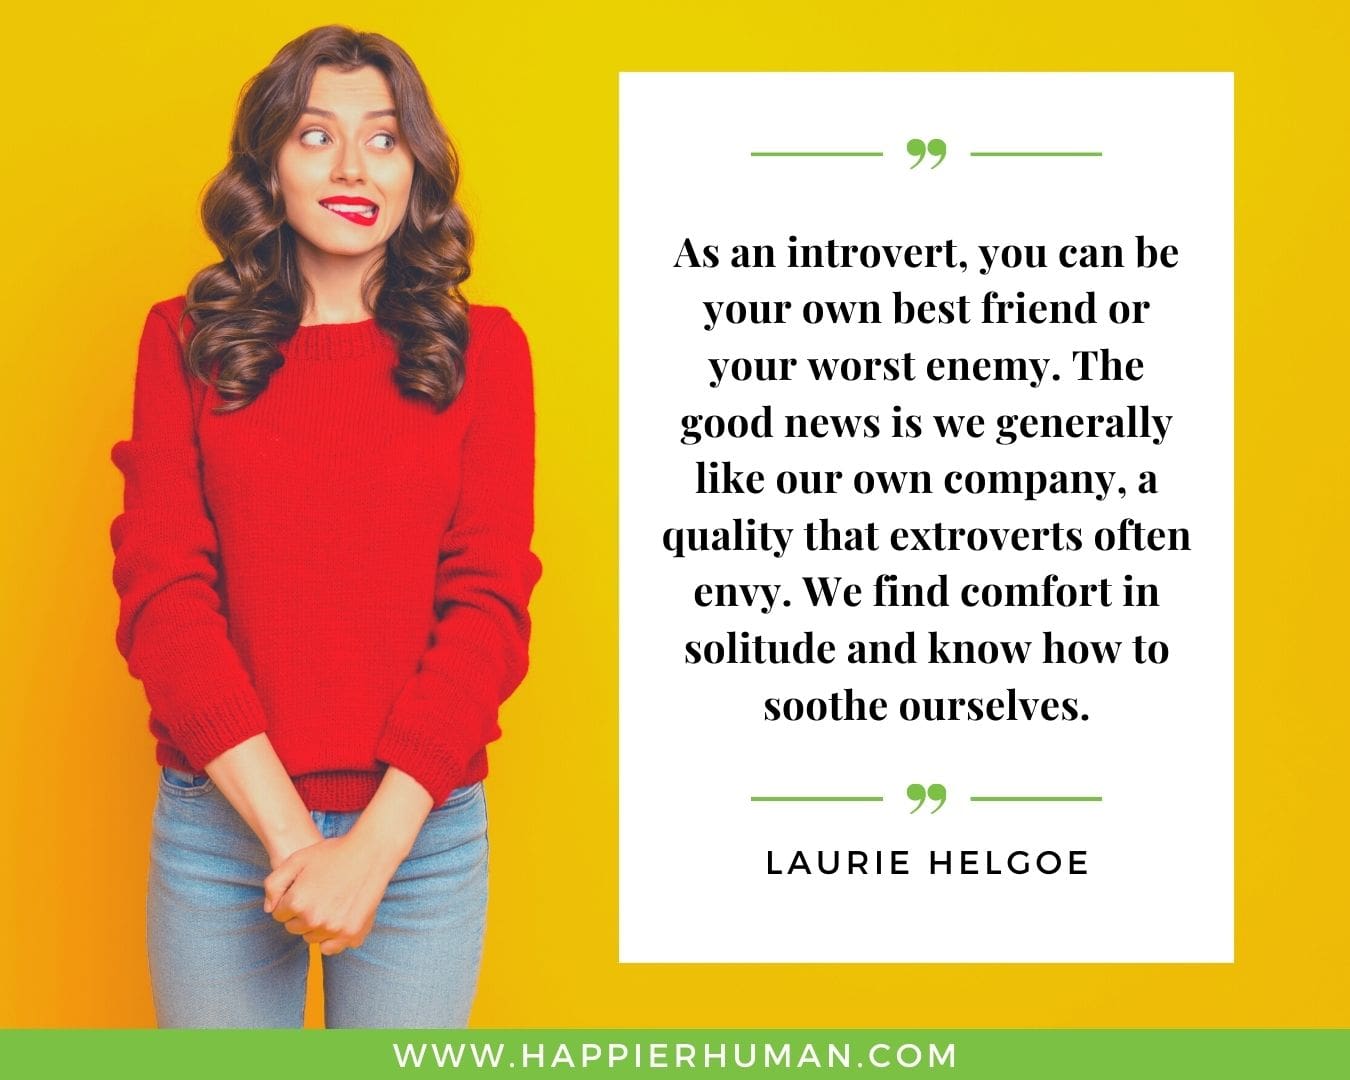 Introvert Quotes - “As an introvert, you can be your own best friend or your worst enemy. The good news is we generally like our own company, a quality that extroverts often envy. We find comfort in solitude and know how to soothe ourselves.” – Laurie Helgoe